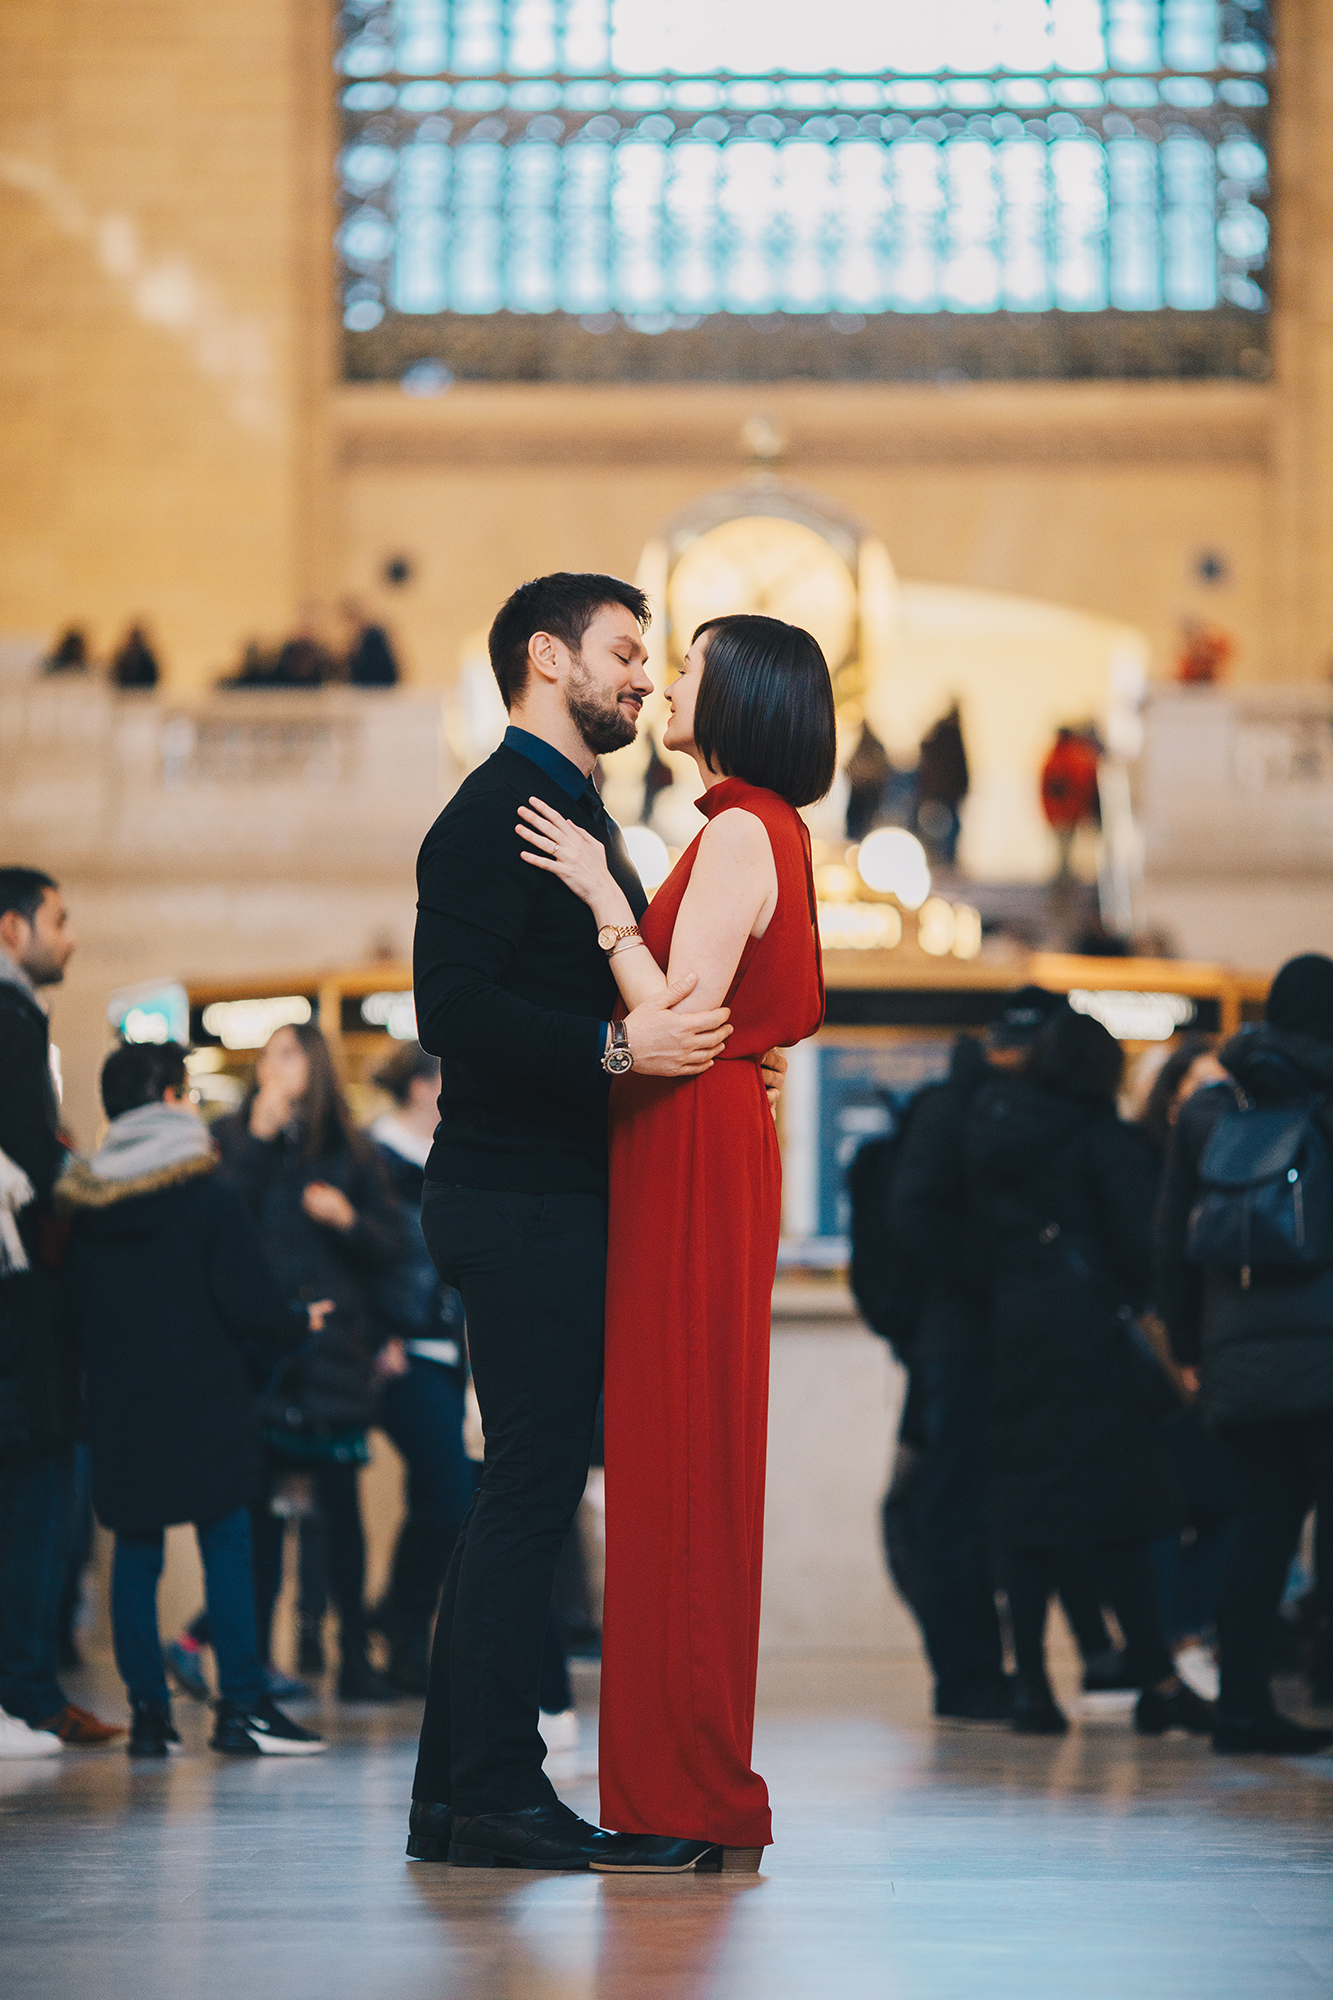 Pretty Times Square Engagement Photos and Grand Central Engagement Photography in New York